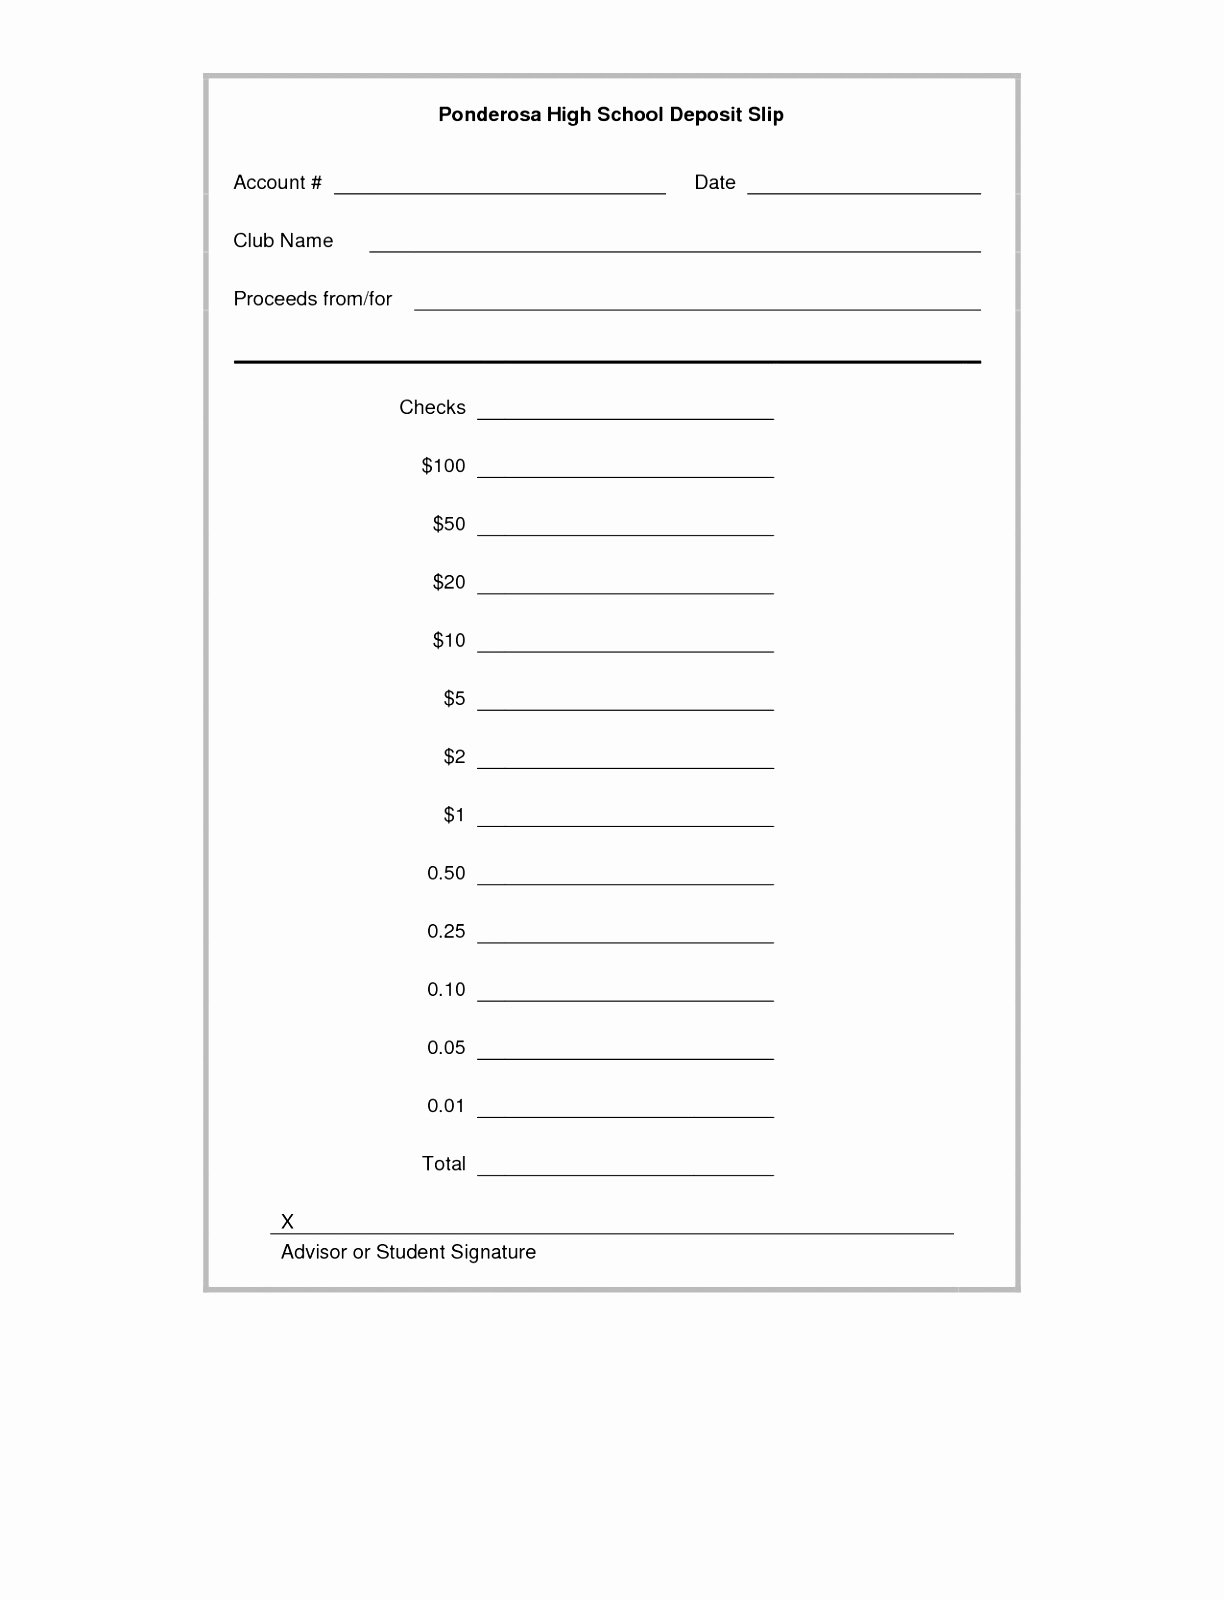 Change order Template Excel Awesome 7 Bank Change order form Template Taeew